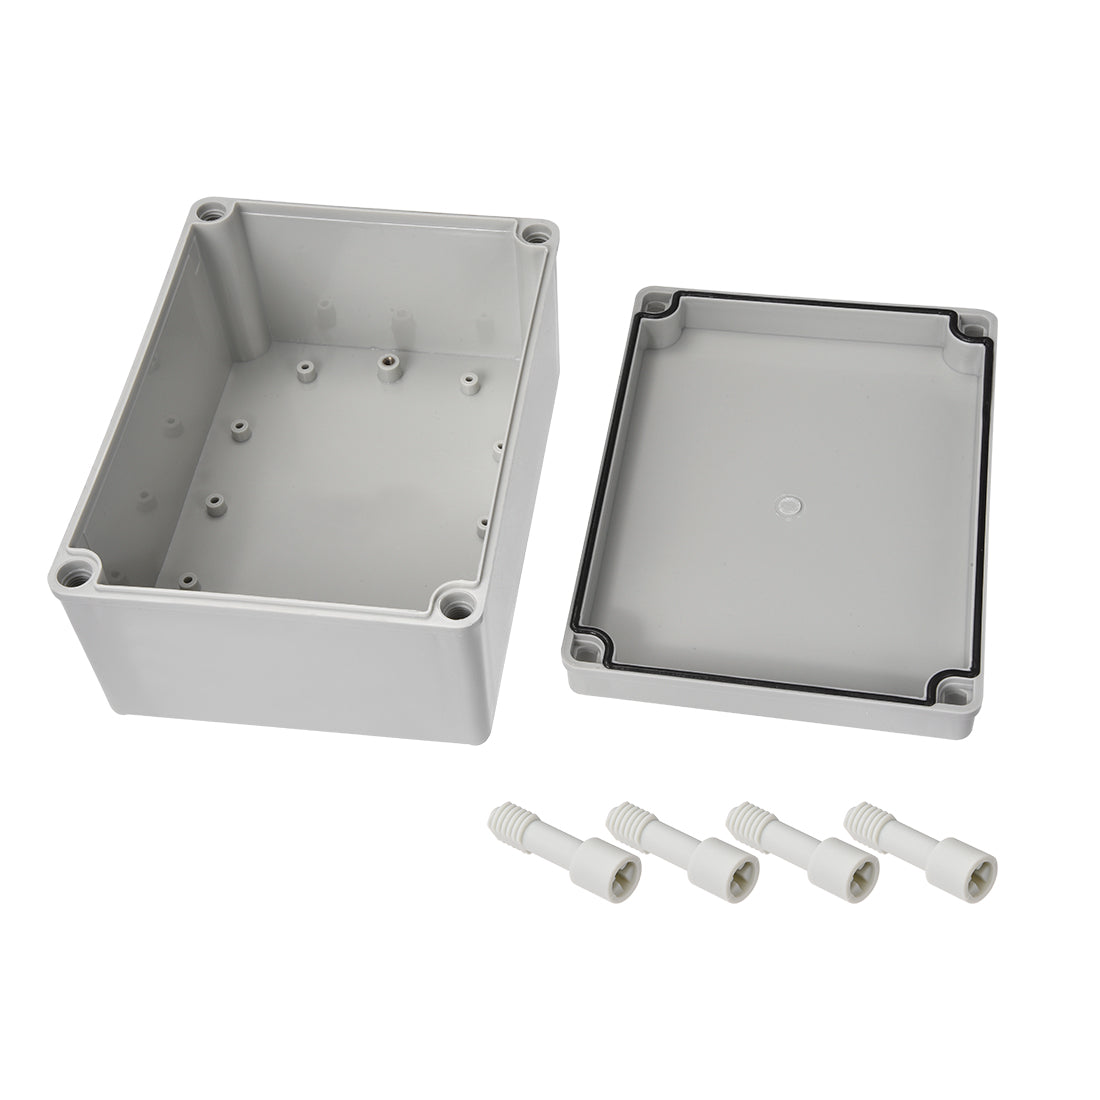 uxcell Uxcell 200mm x 150mm x 100mm Dustproof IP65 Junction Box DIY Case Enclosure Gray